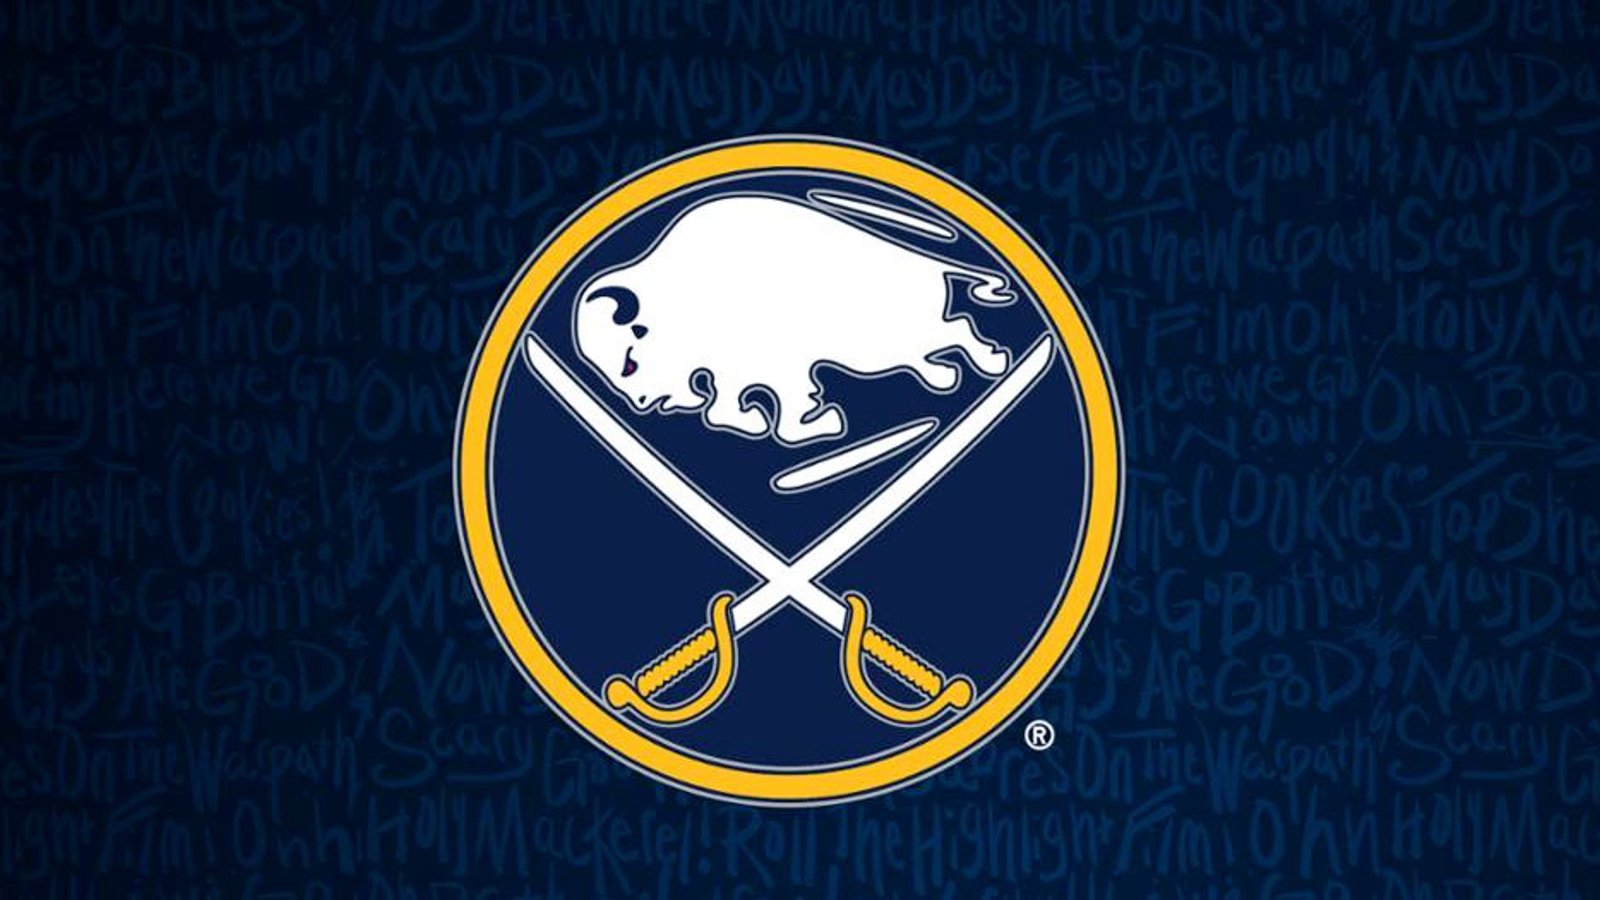 Sabres officially announce new jerseys and uniforms